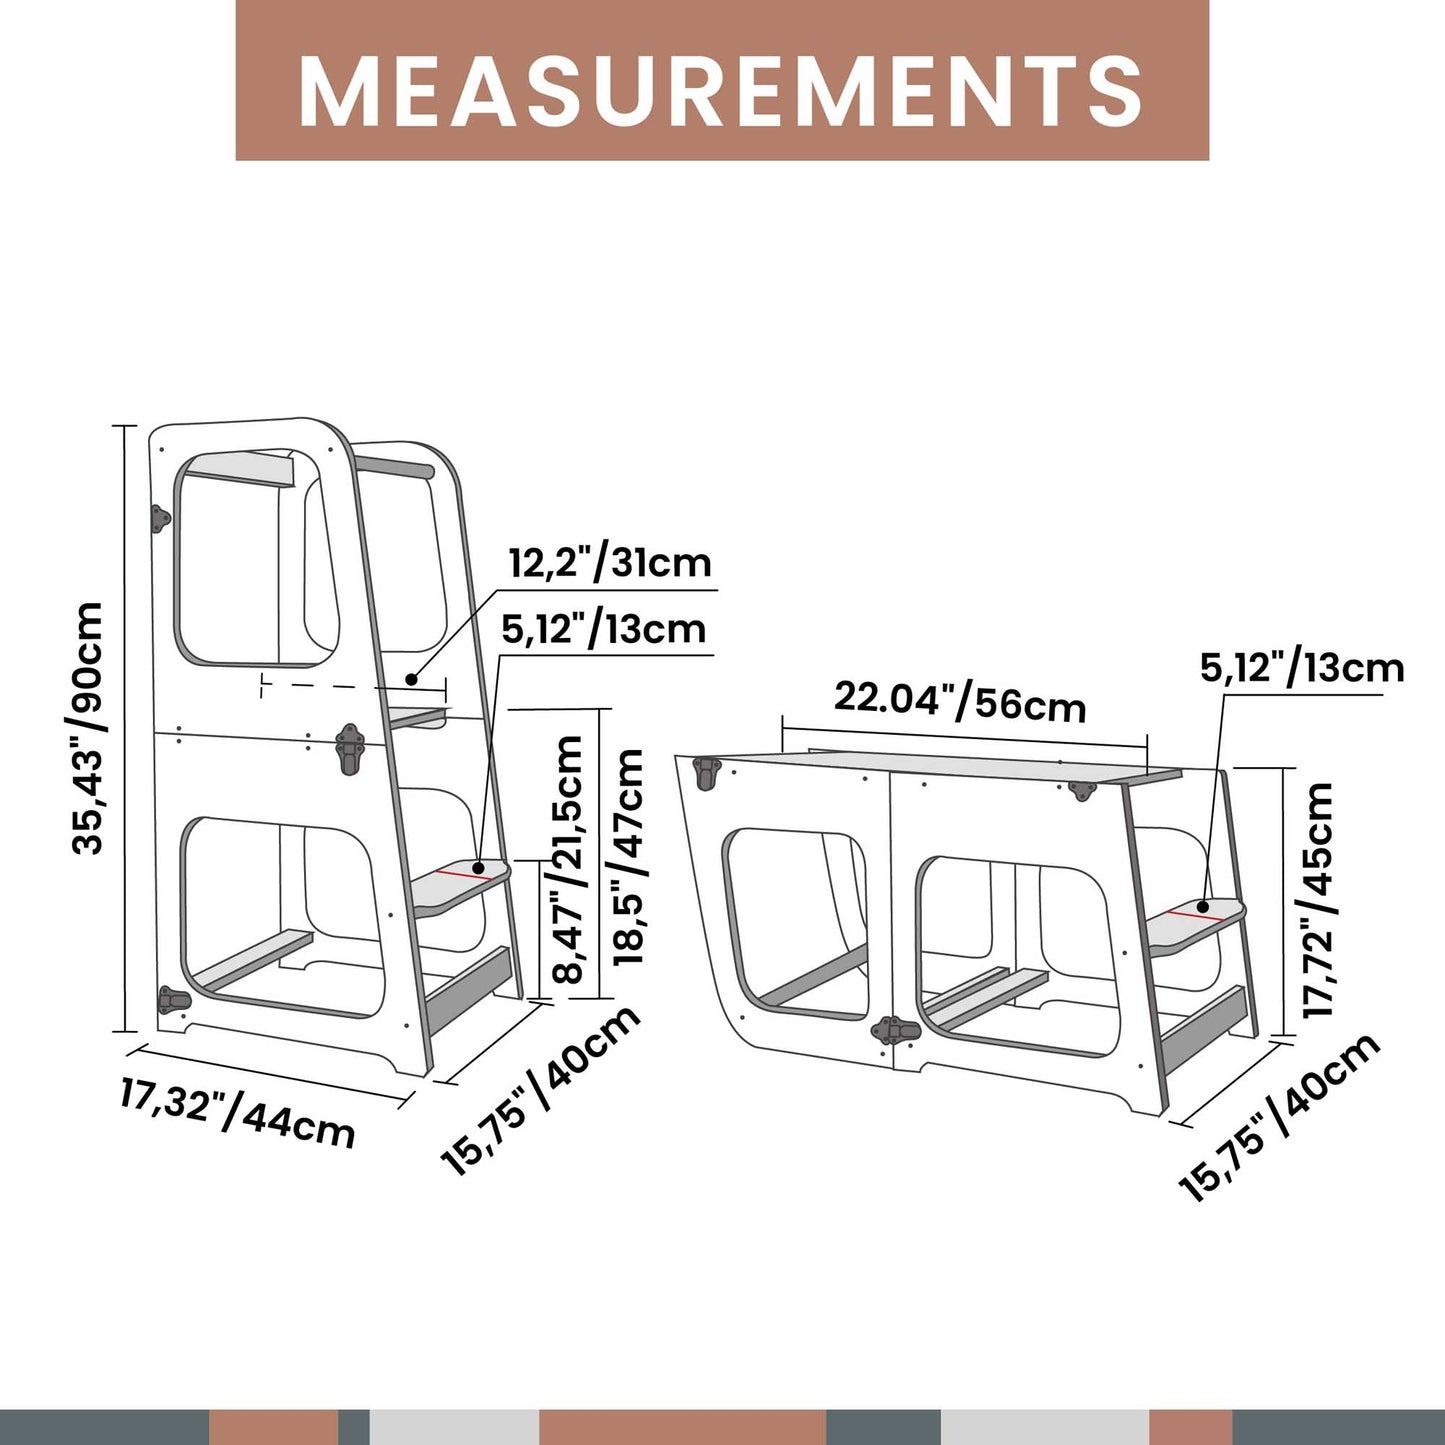 A diagram displaying the measurements of a Sweet Home From Wood 2-in-1 transformable kitchen tower - table and chair for kids.